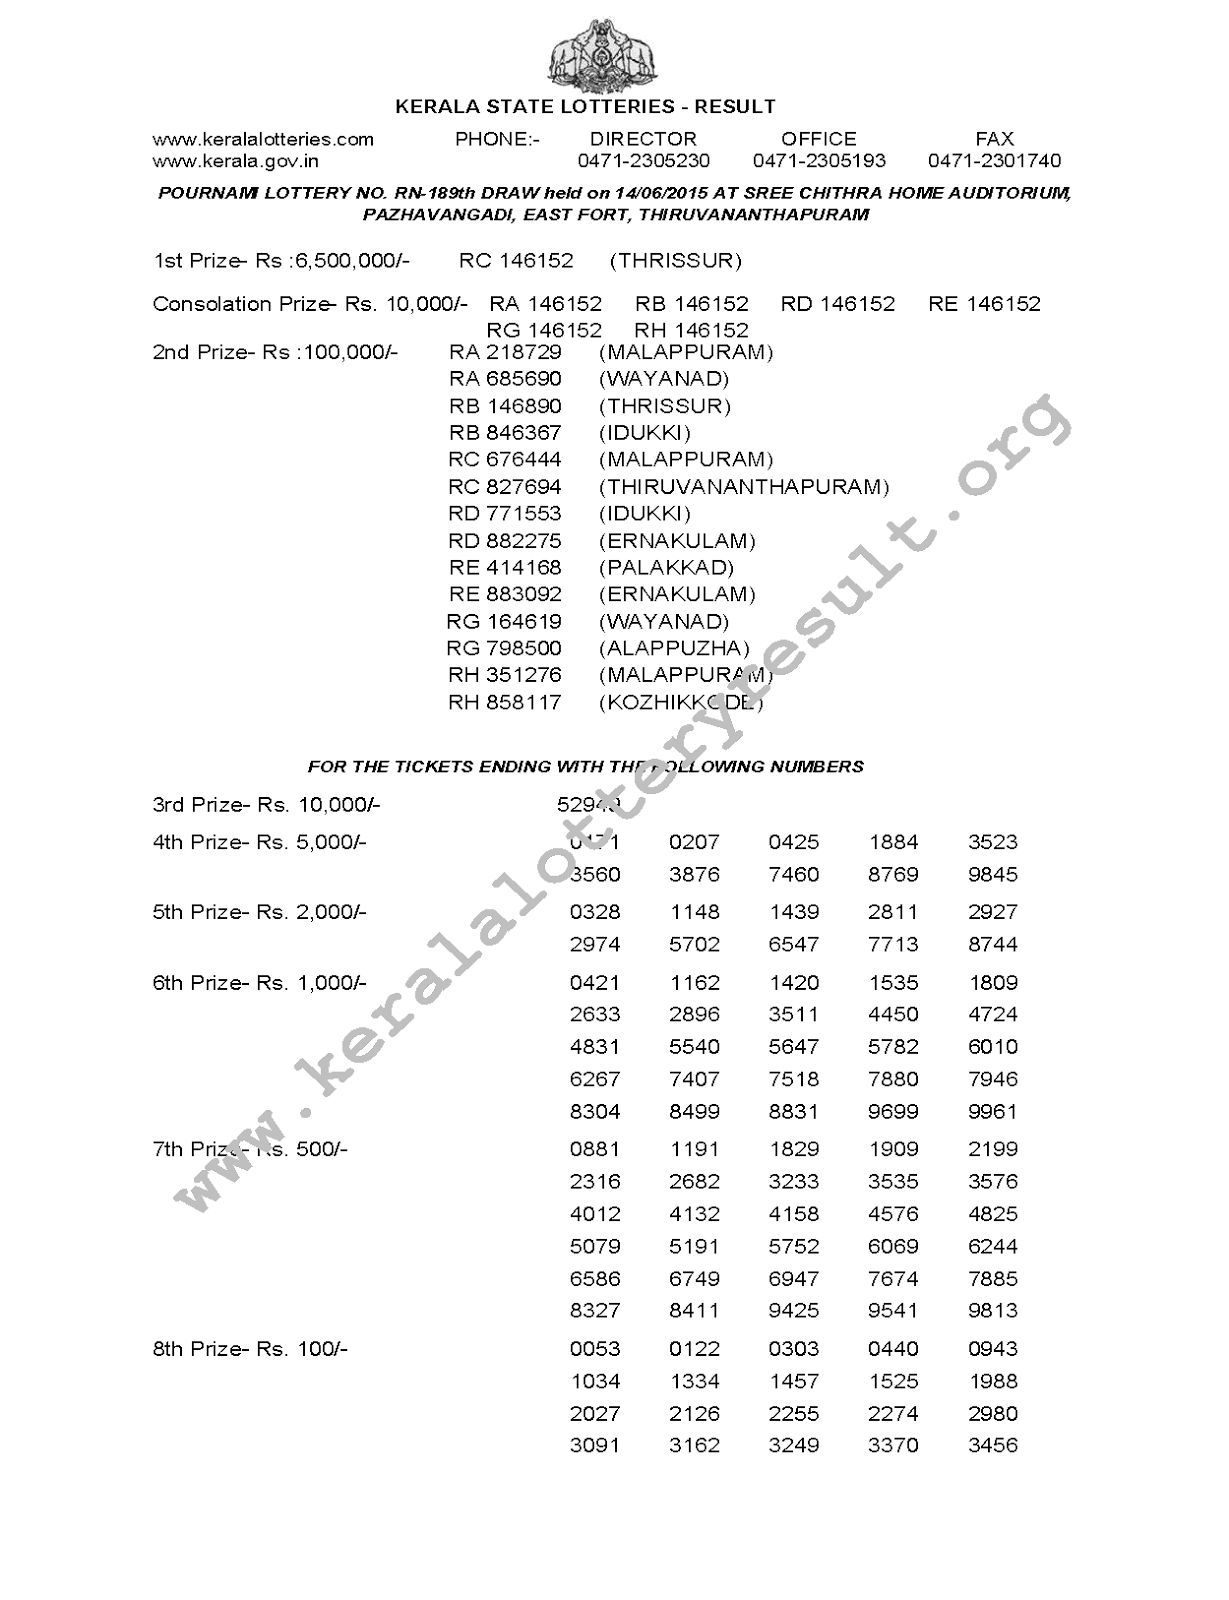 POURNAMI Lottery RN 189 Result 14-6-2015